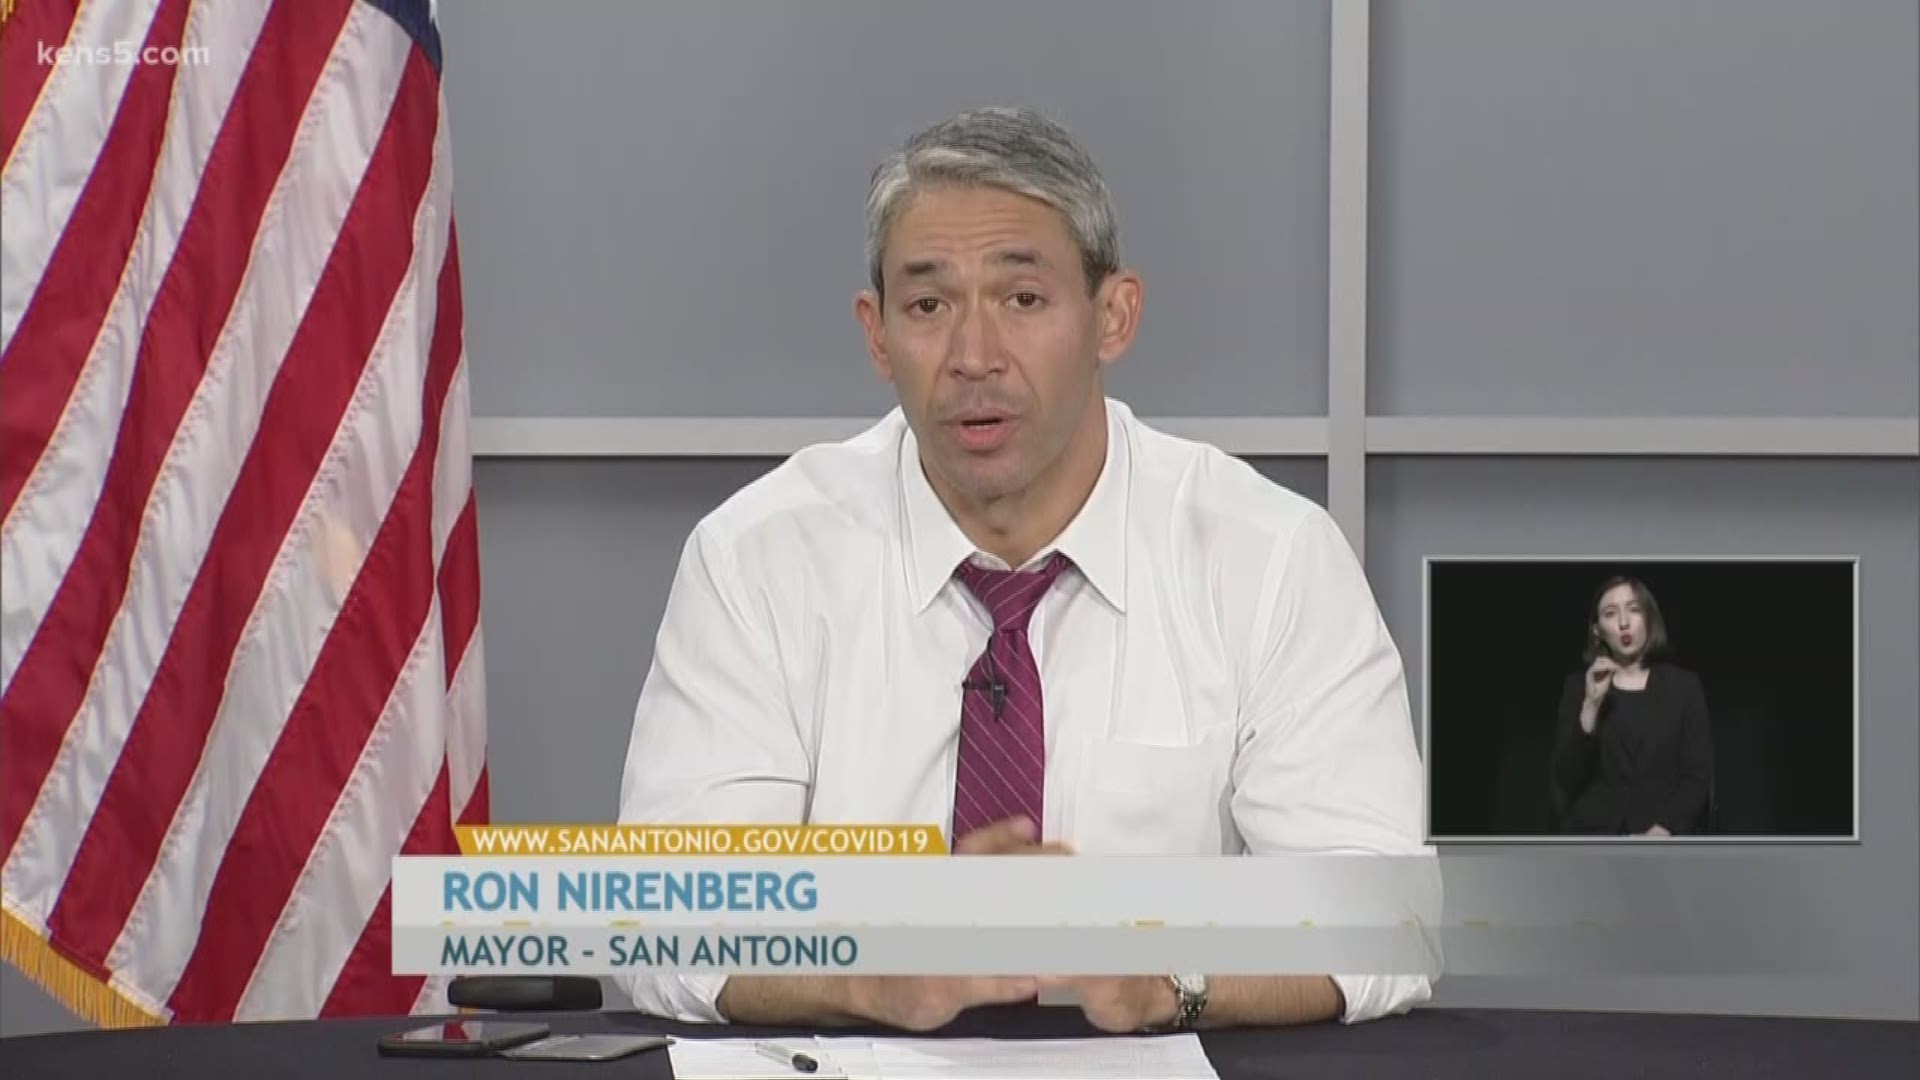 Mayor Nirenberg says 82 of the coronavirus cases are due to community spread, which makes this the first update where those cases outnumber travel-related cases.